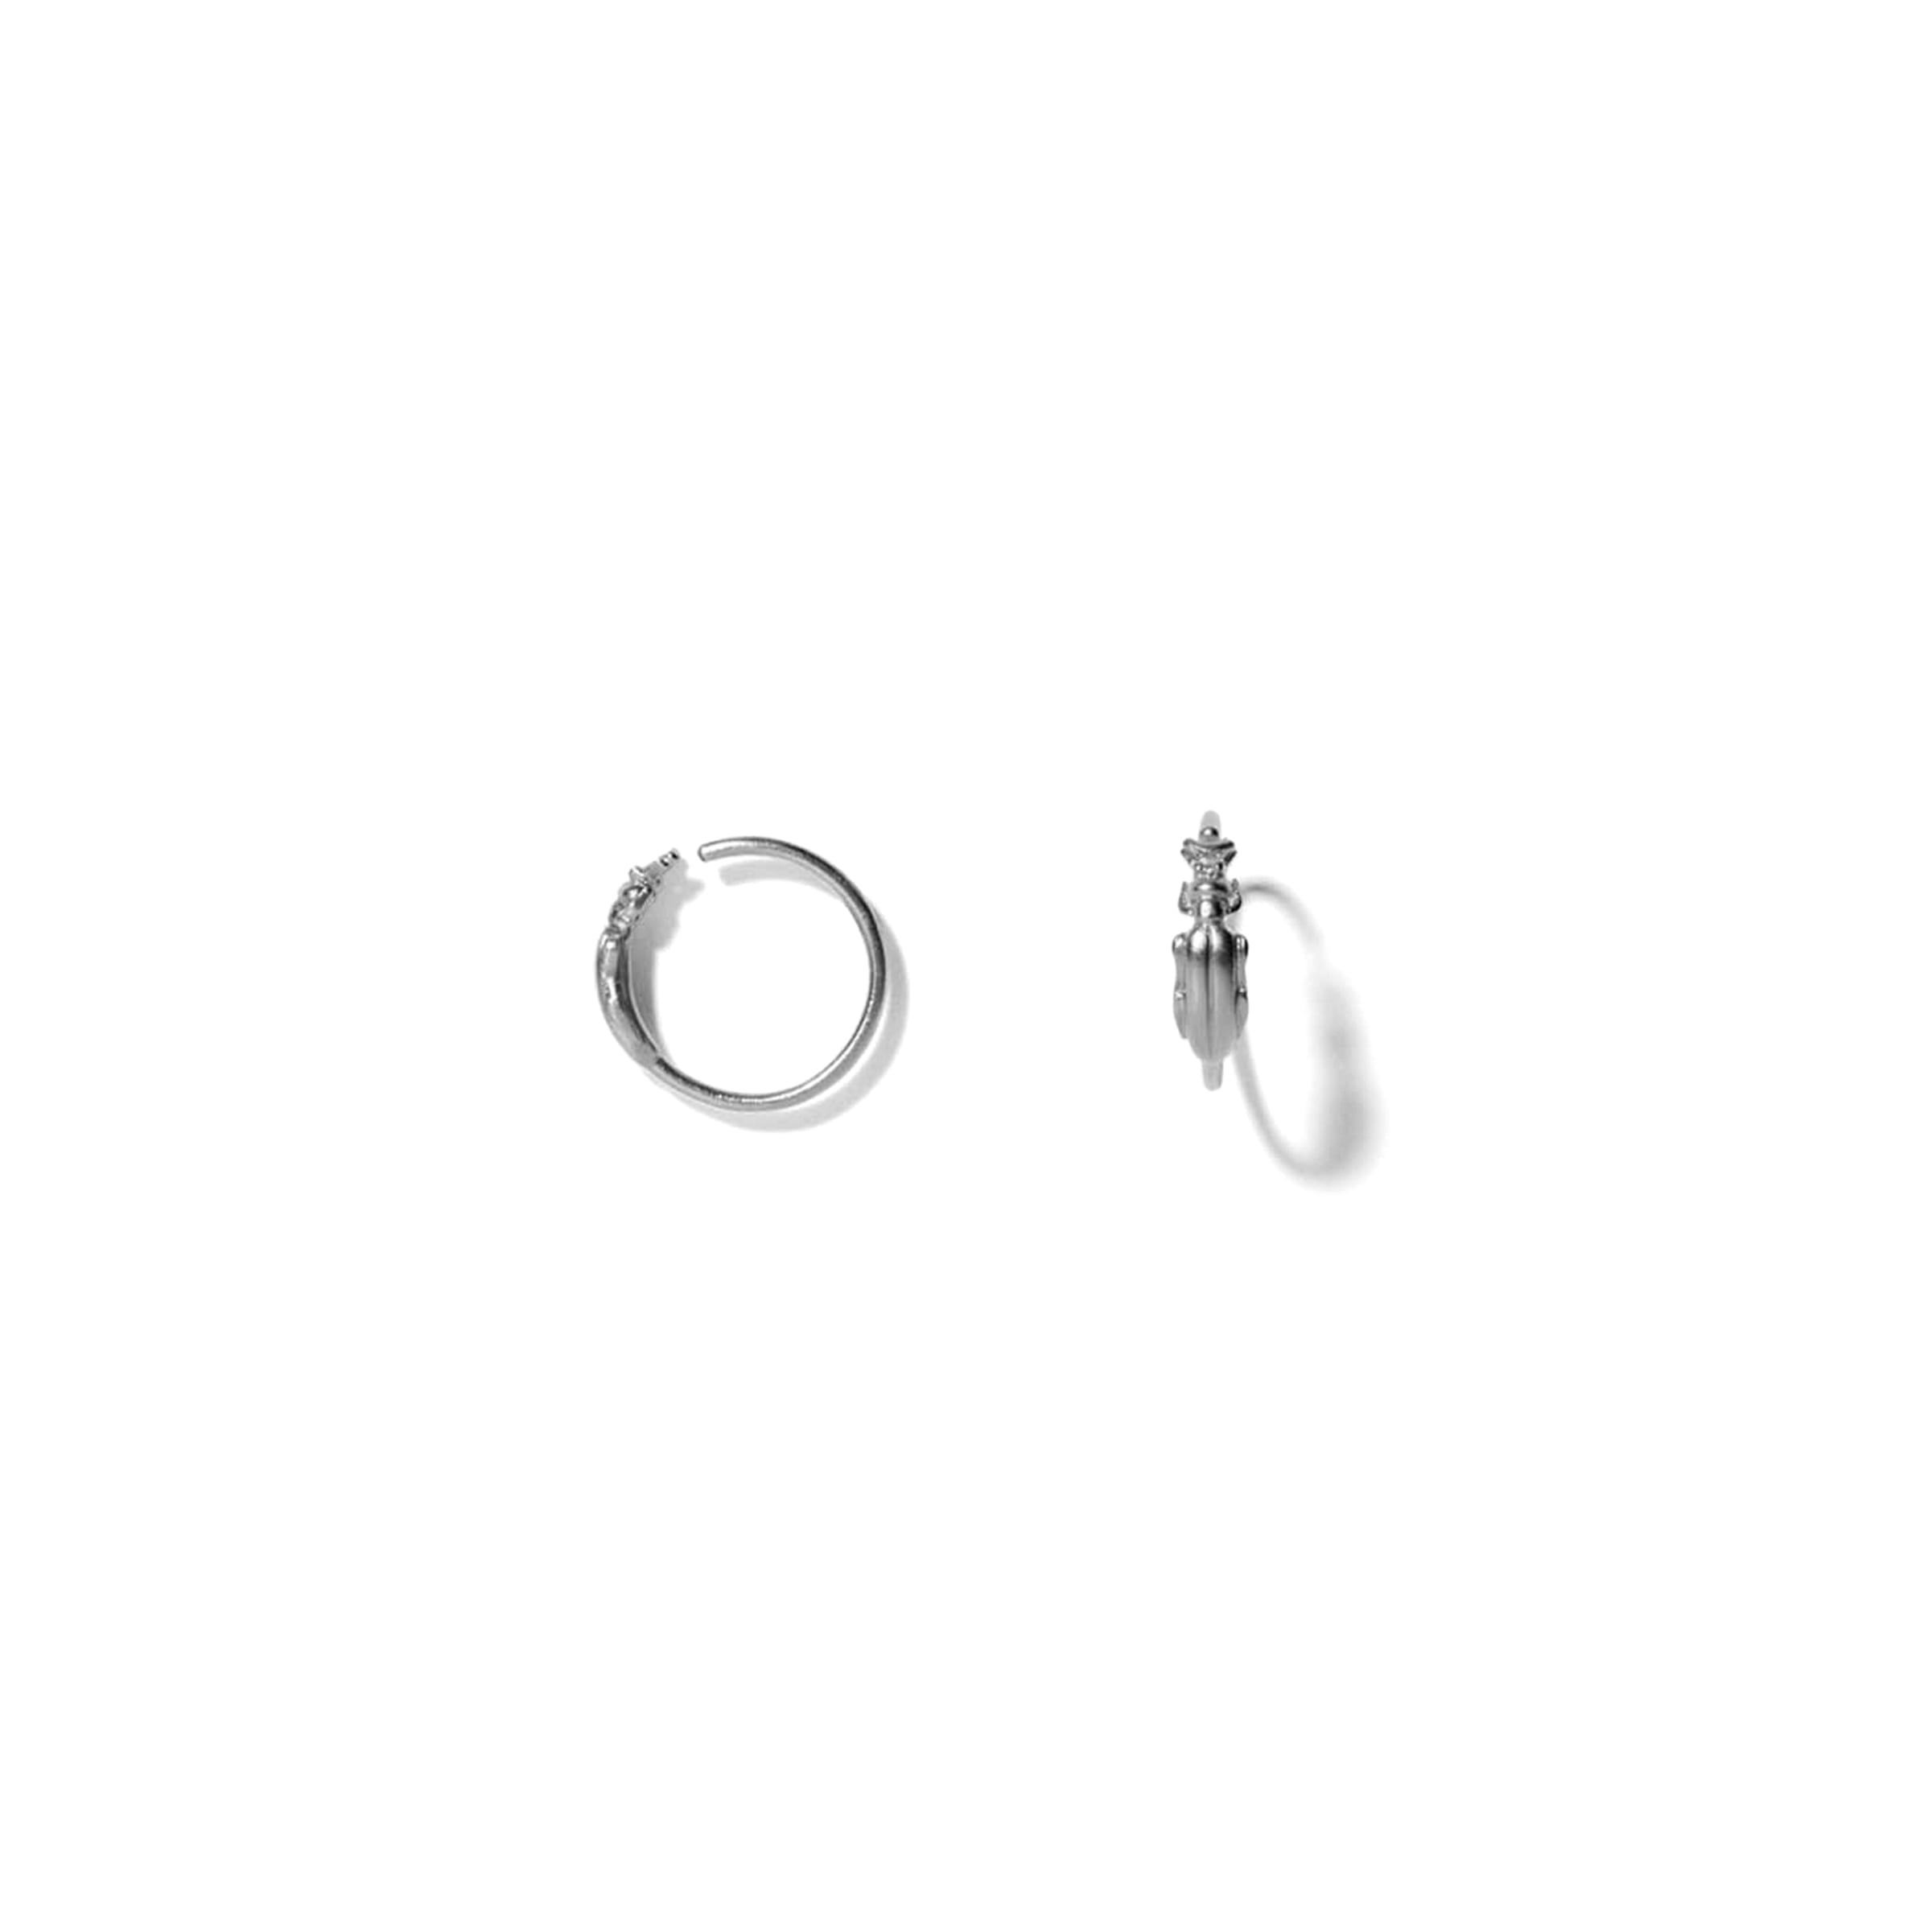 Line & Jo earring with small beetle in ruthenium covered sterling silver